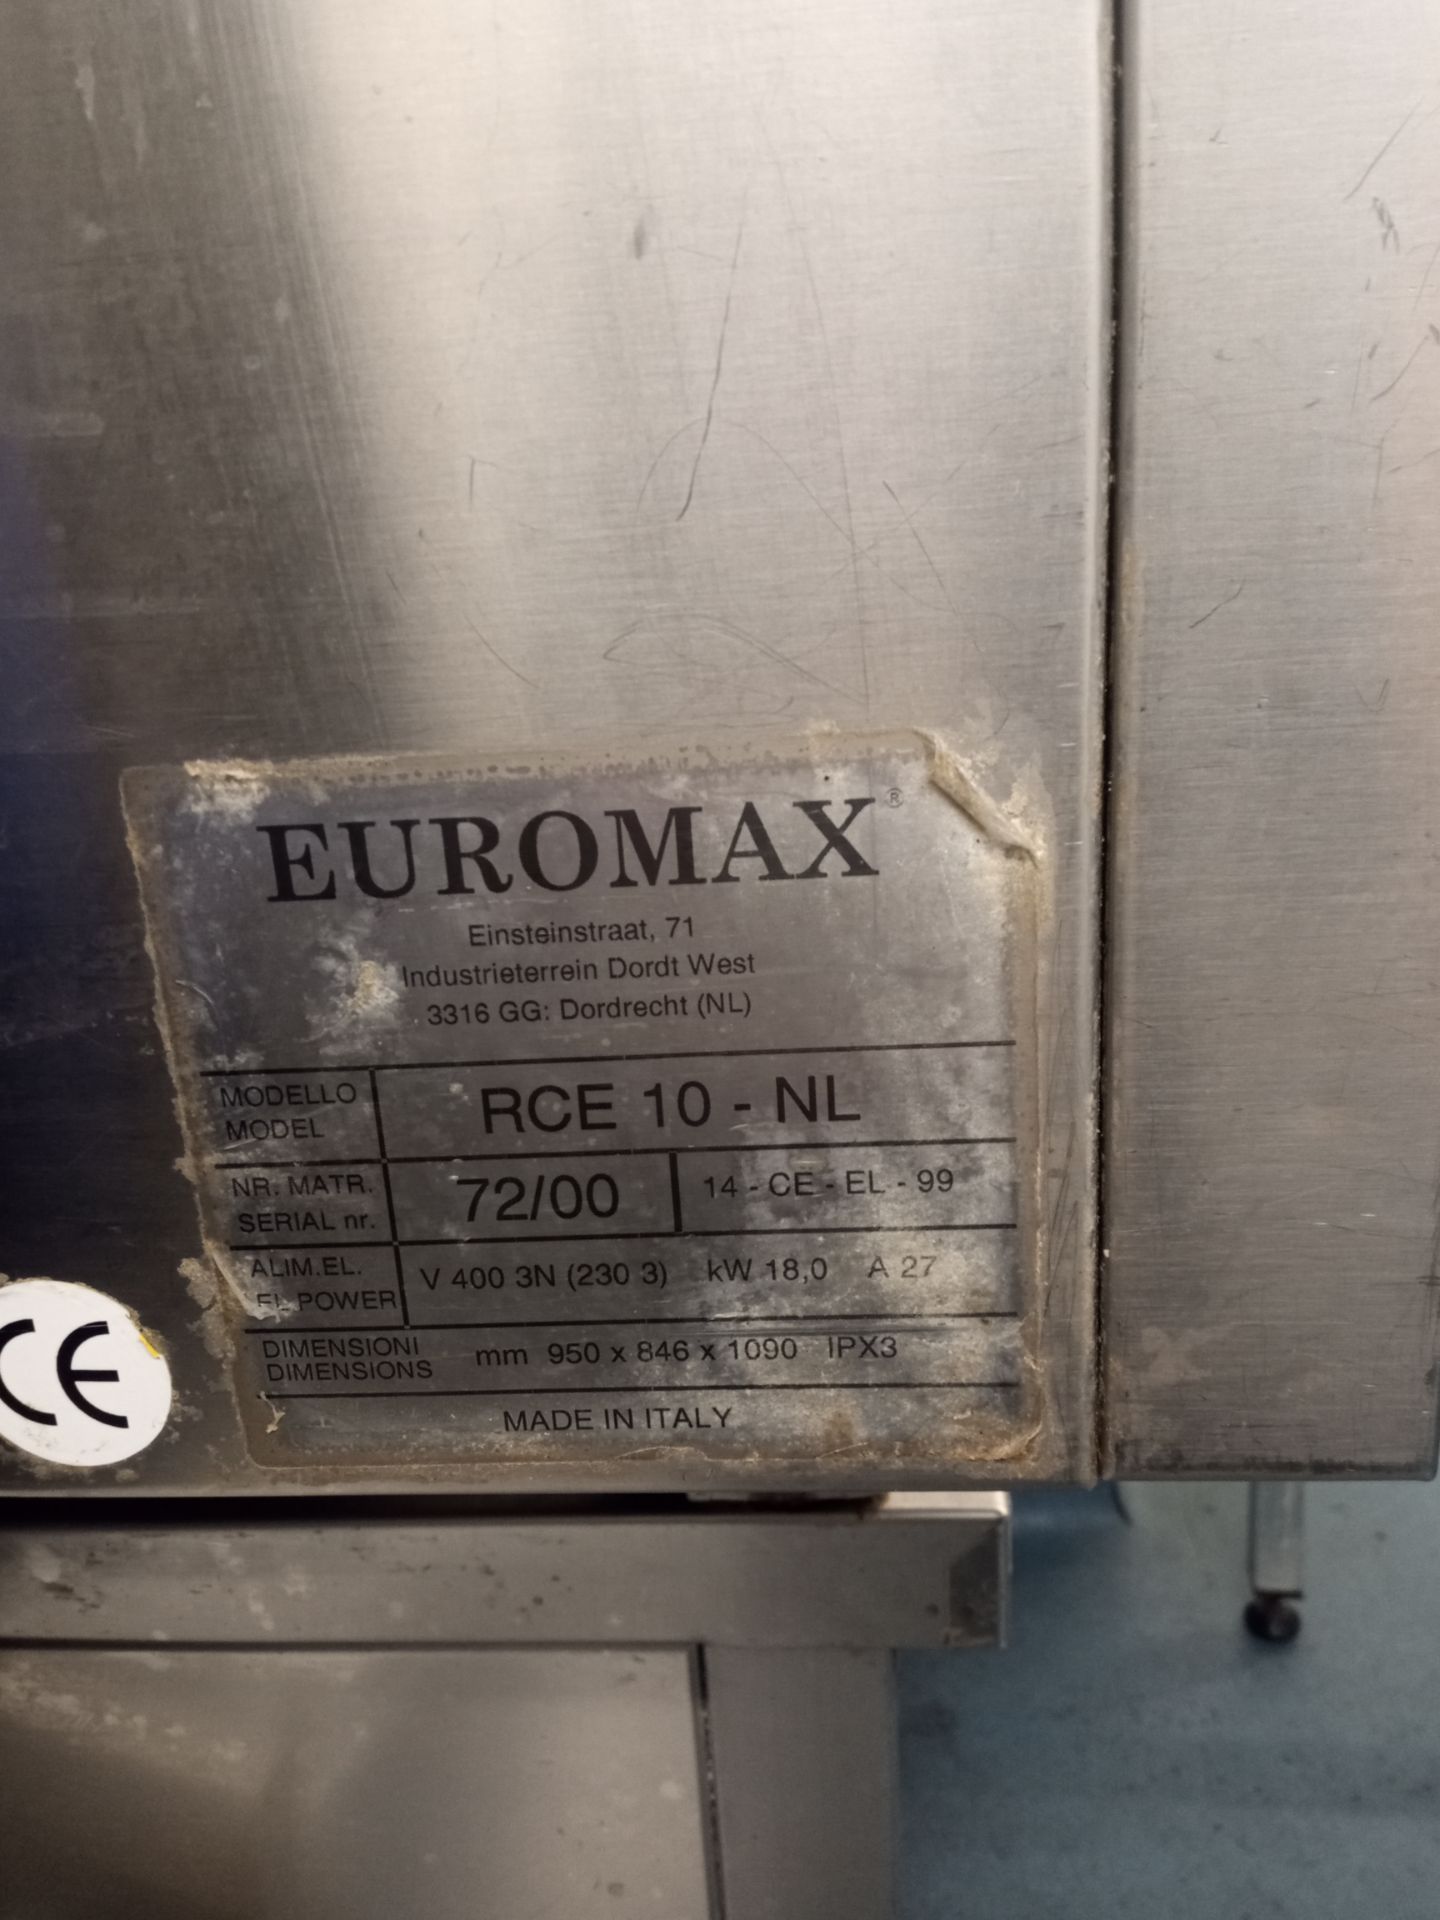 Large Euromax Industrial Oven - Image 3 of 4